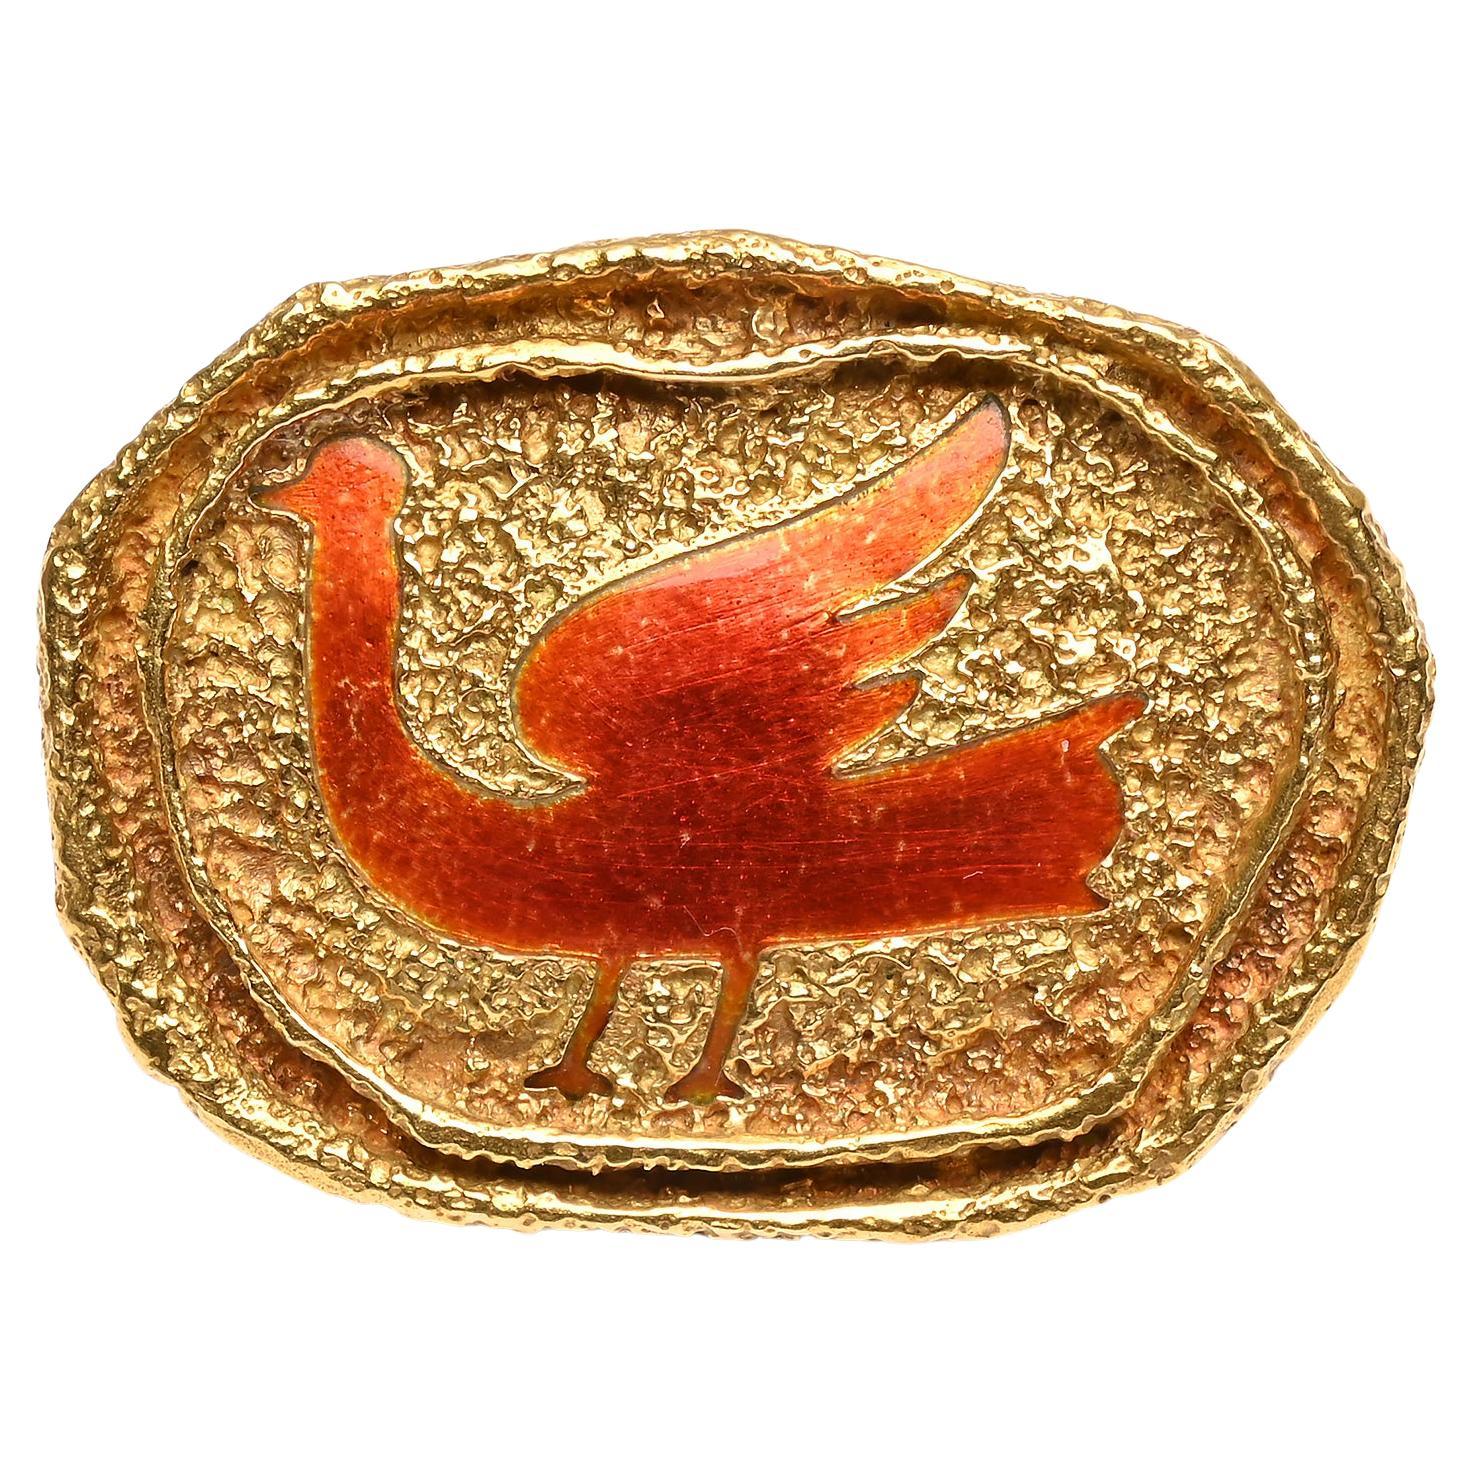 Georges Braque Gold and Enamel Bird Brooch